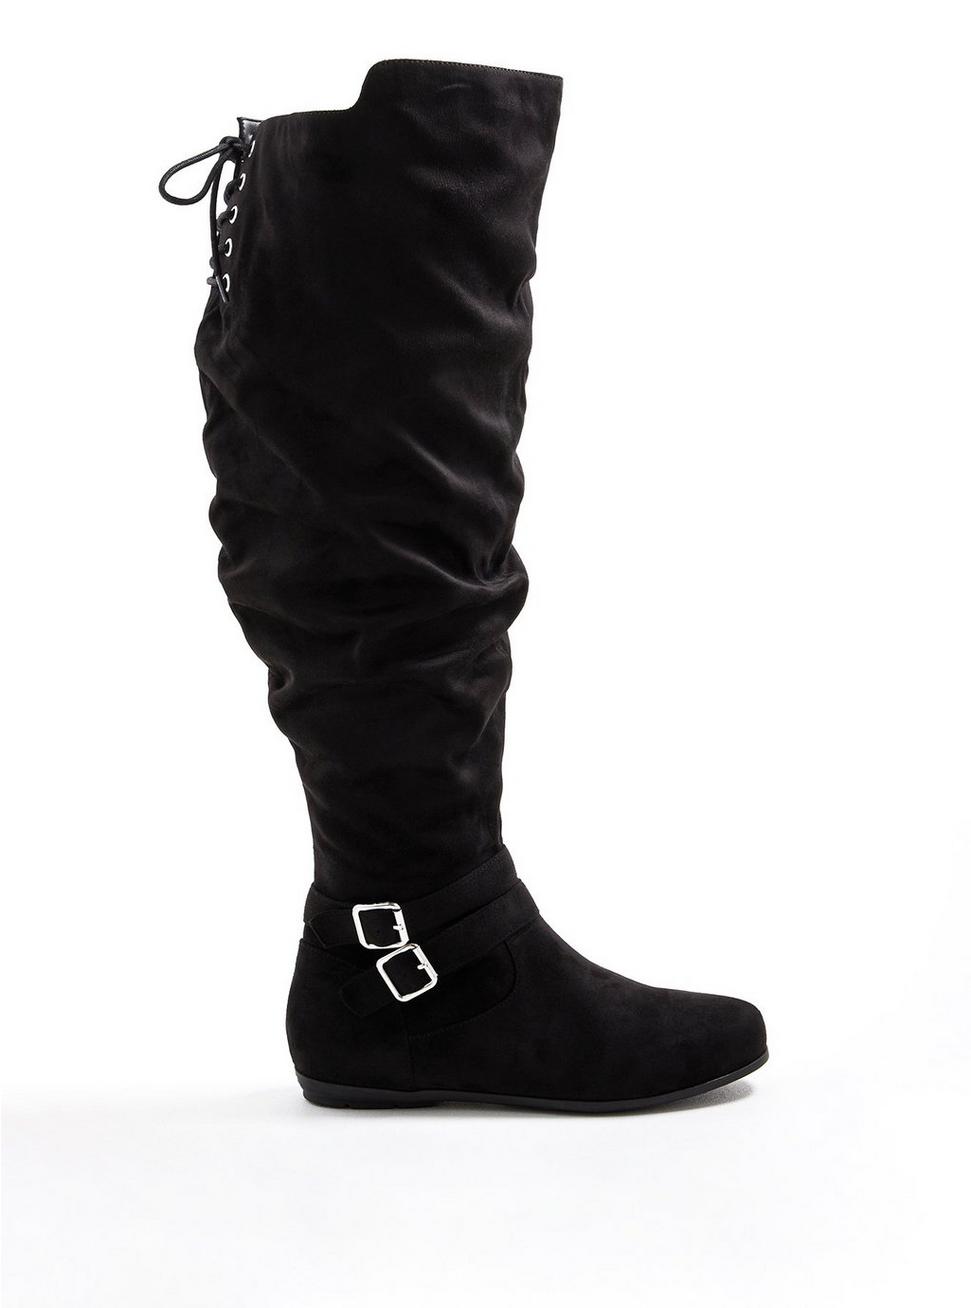 Plus Size Double Buckle Over-The-Knee Boot - Faux Suede Black (WW), BLACK, alternate